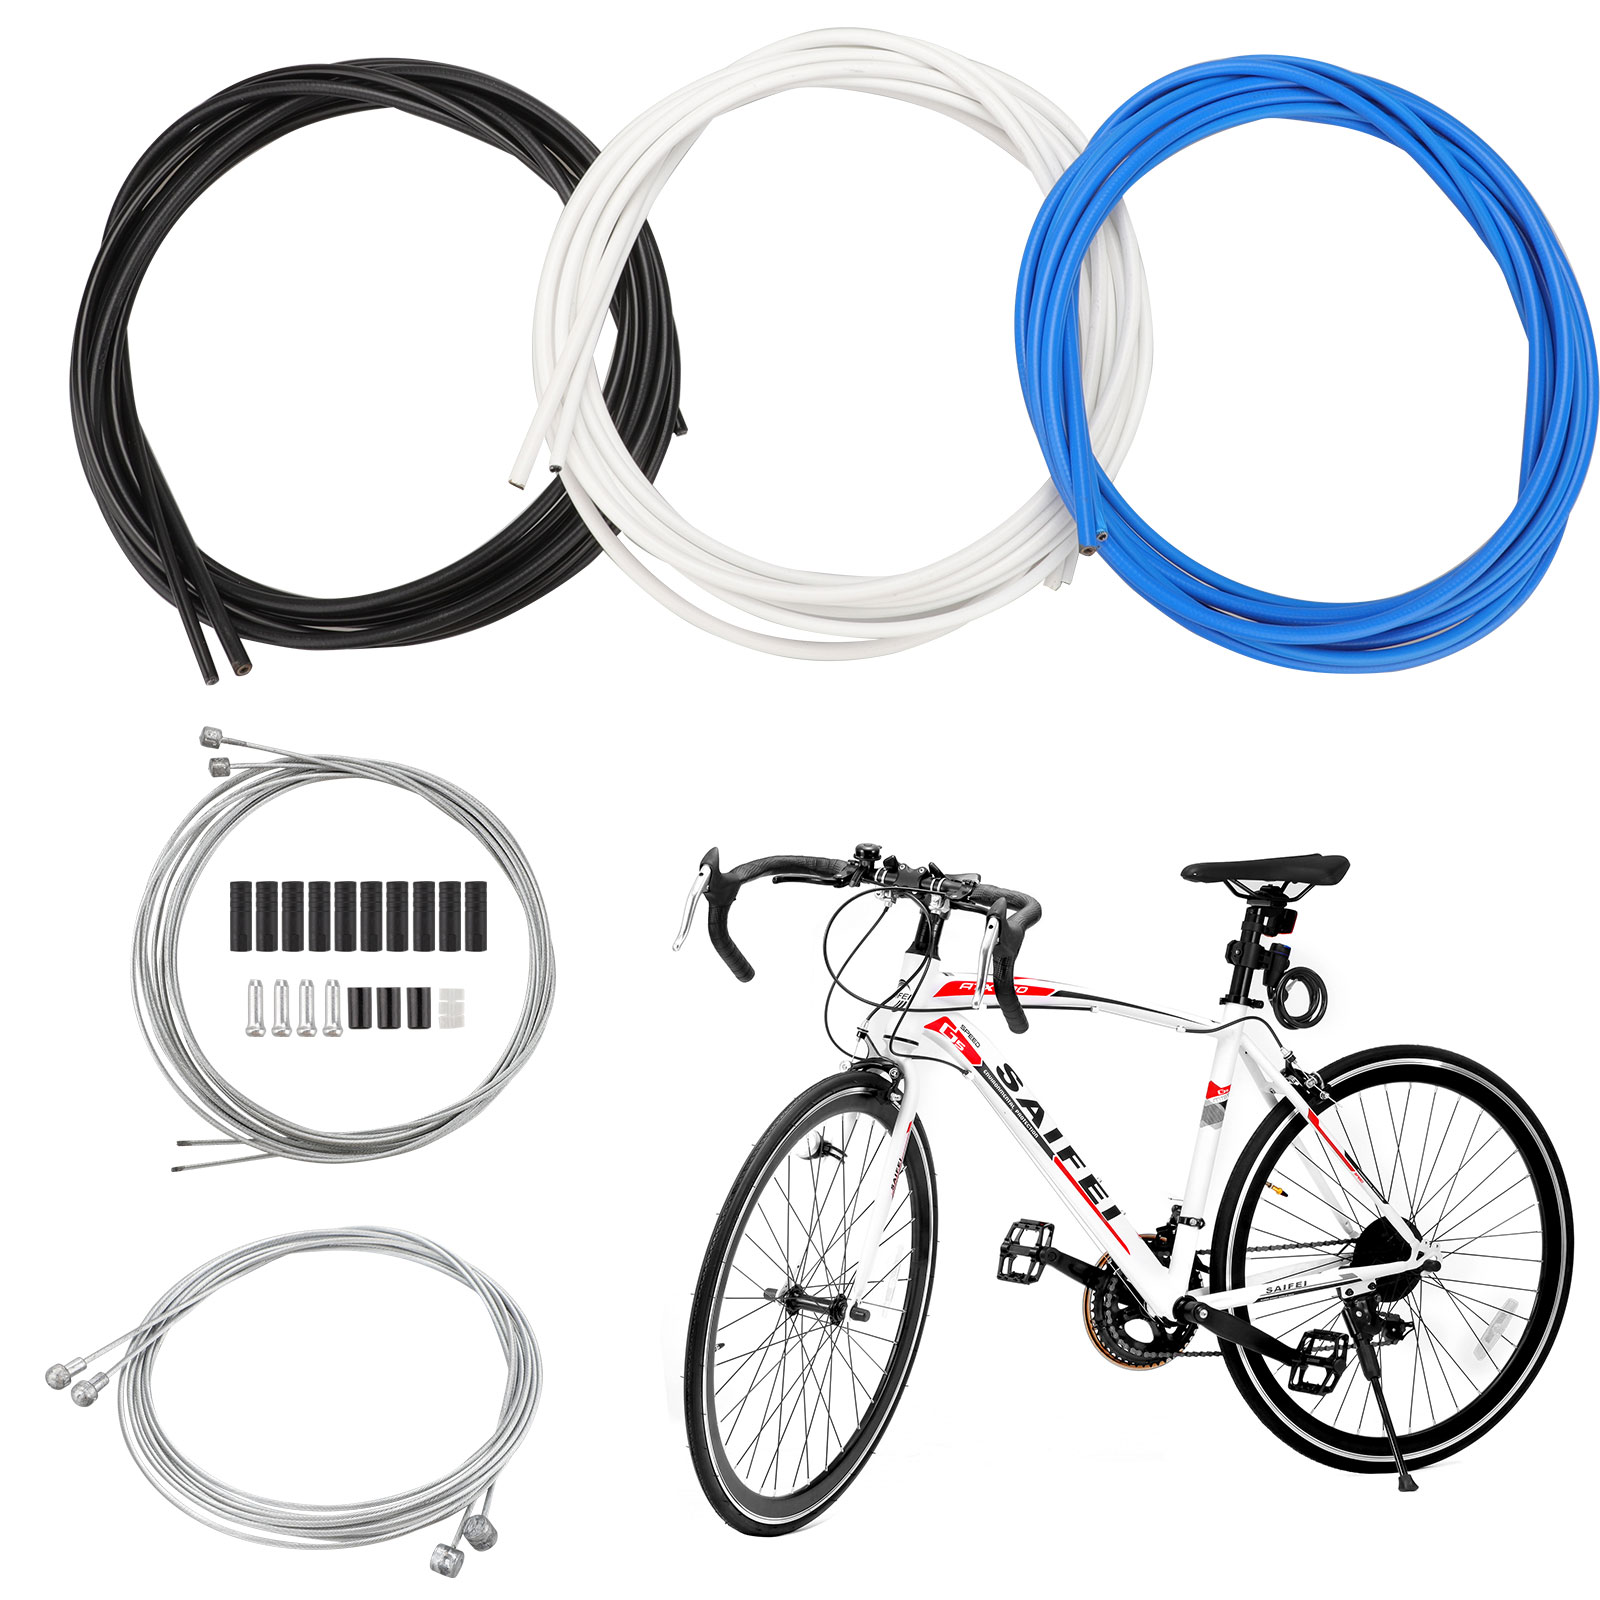 Fippy Universal Bicycle Shifter Cable Bike Brake Cable Set with Housing Replacement Control Line Set for Mountain Road Bike